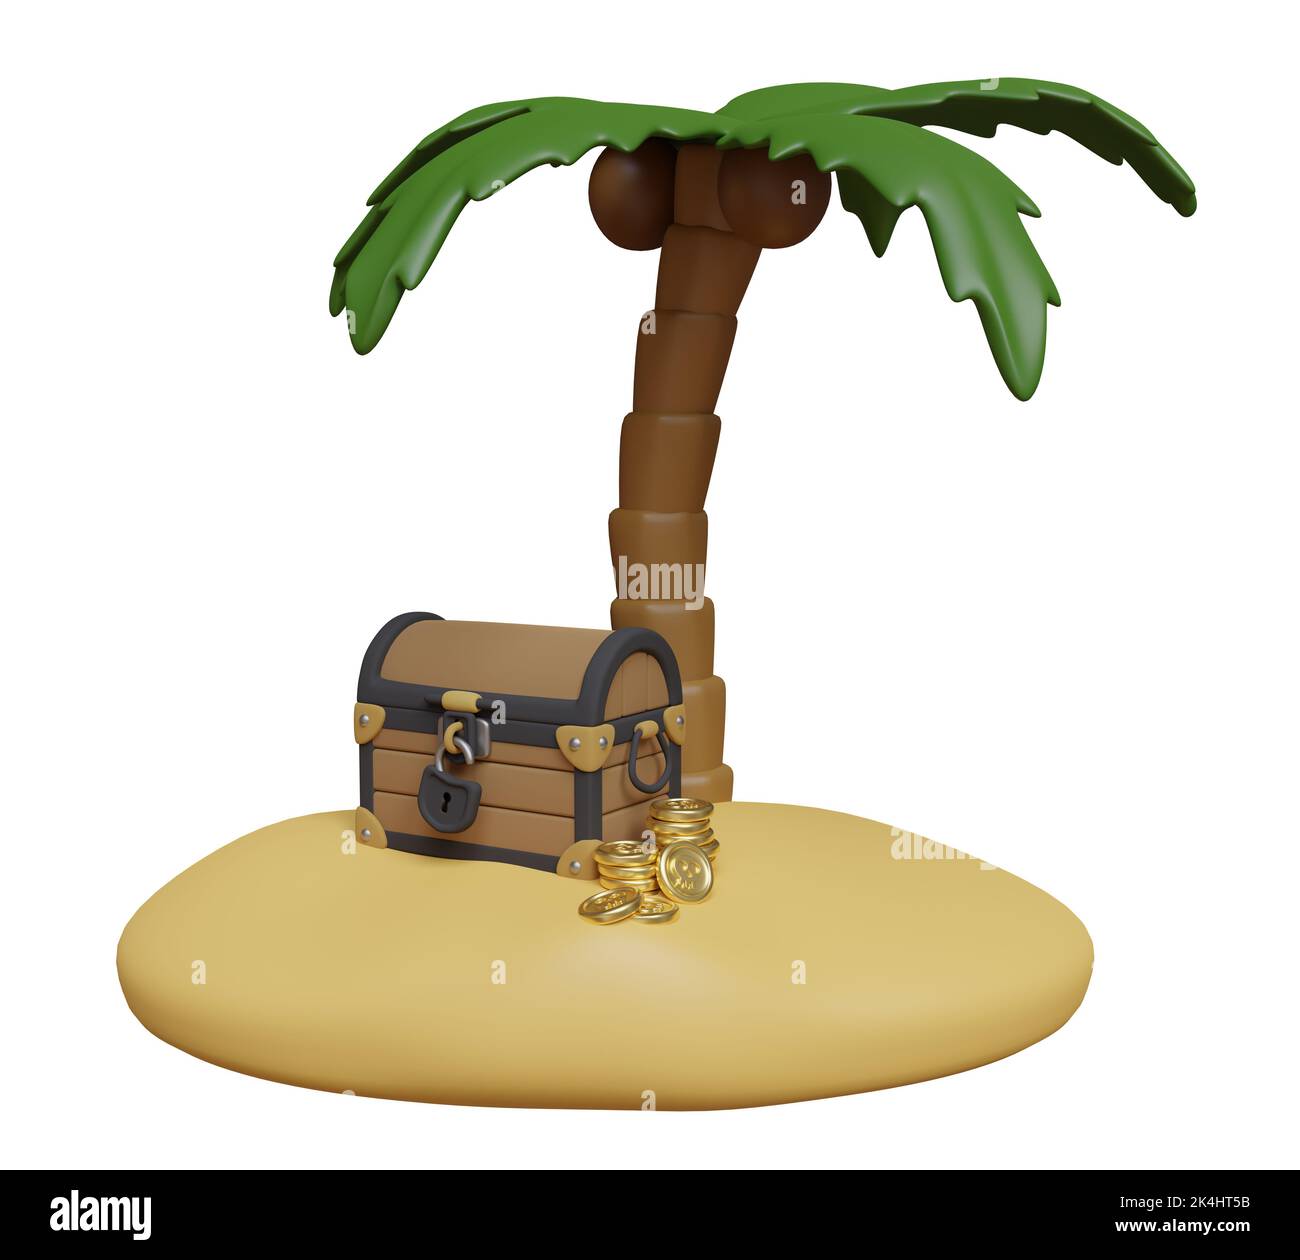 Cartoon island with palm and treasure chest, isolated on white. 3D illustration. Stock Photo